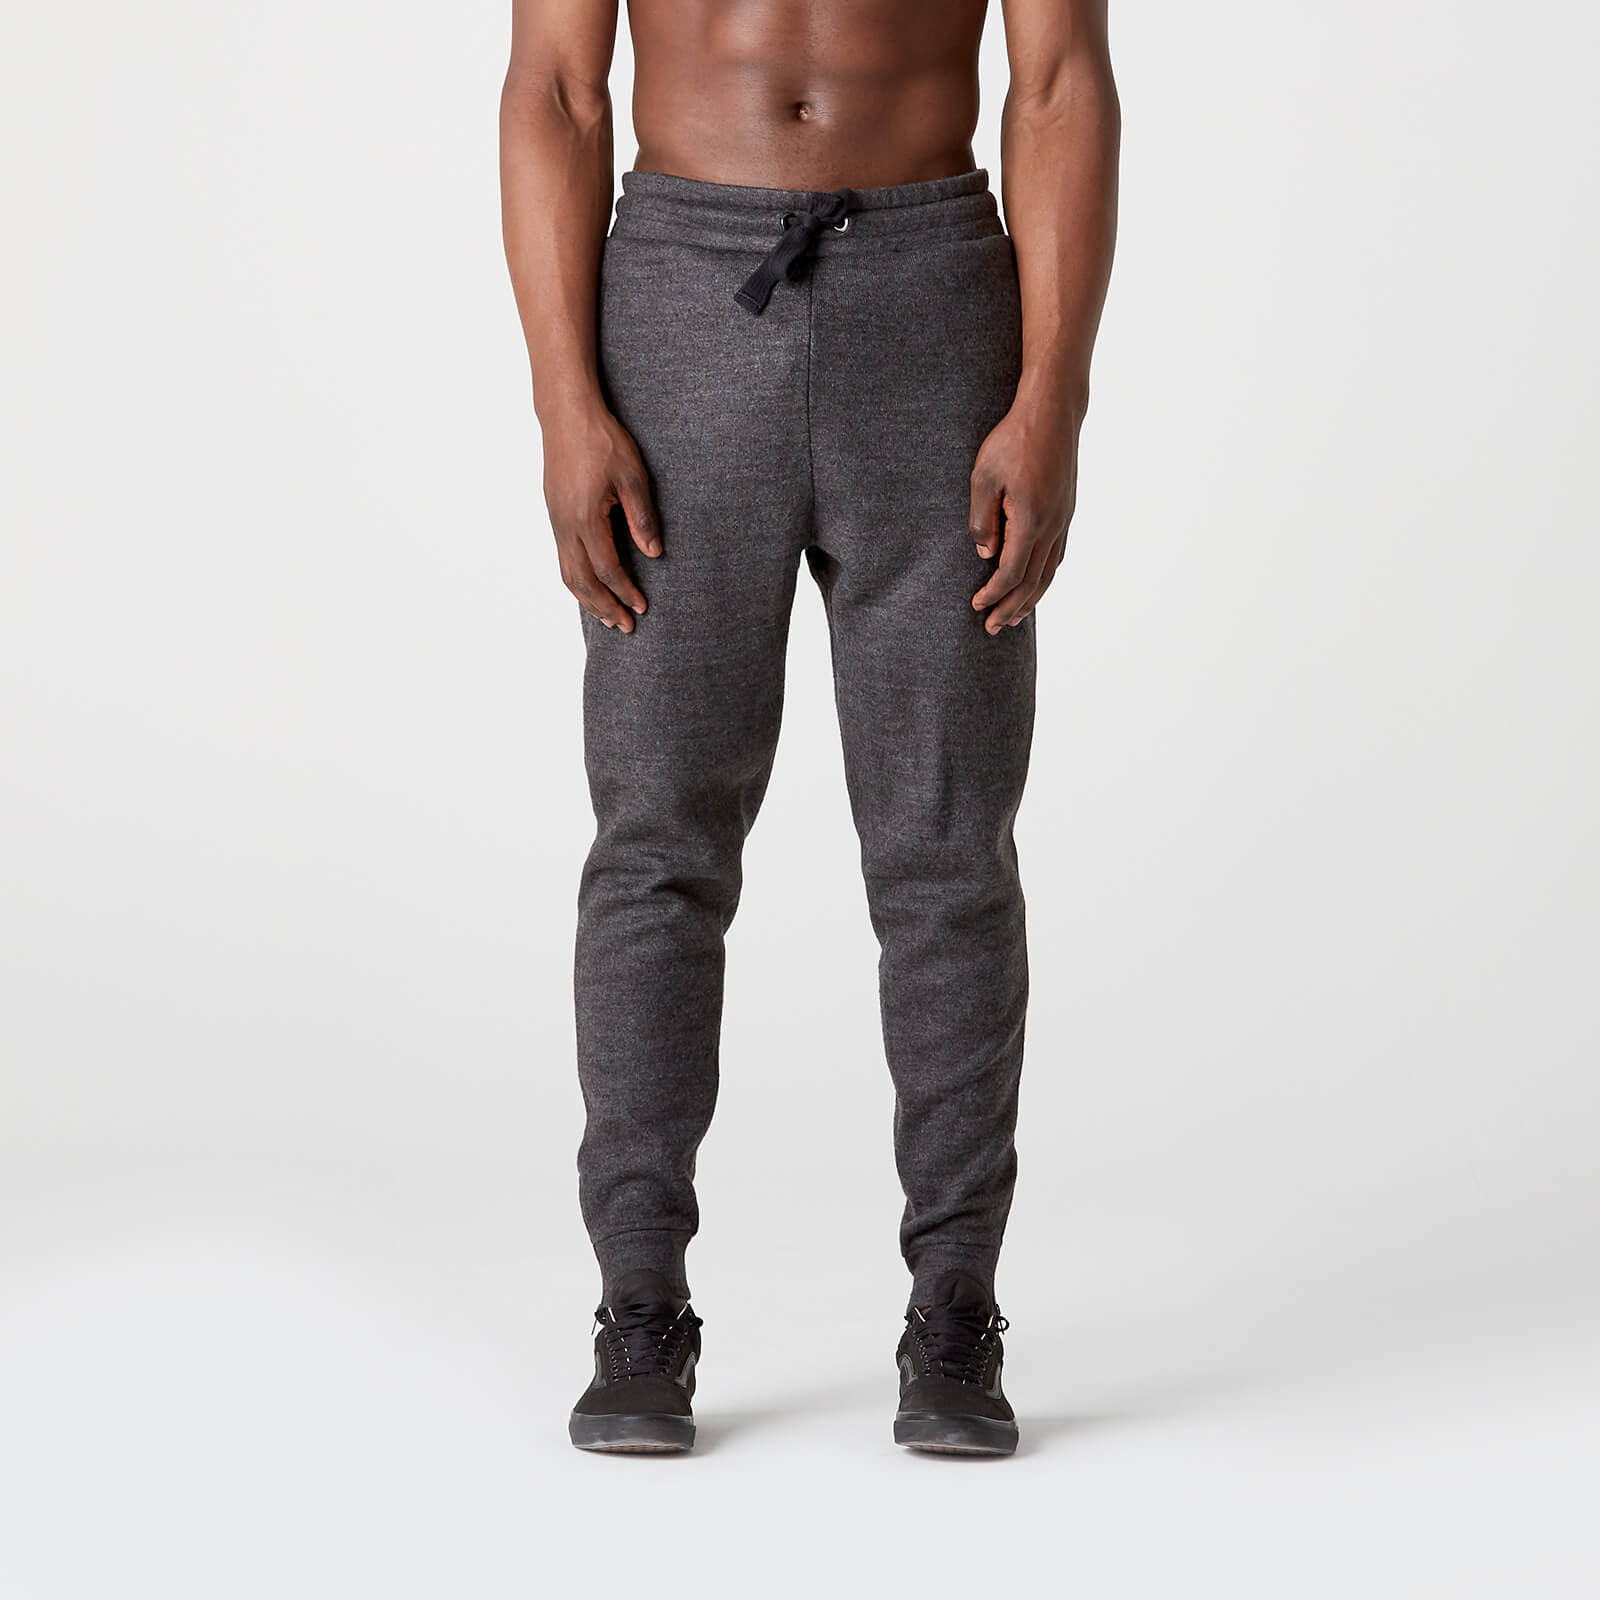 Luxe Leisure joggers hlače - Sive - XS